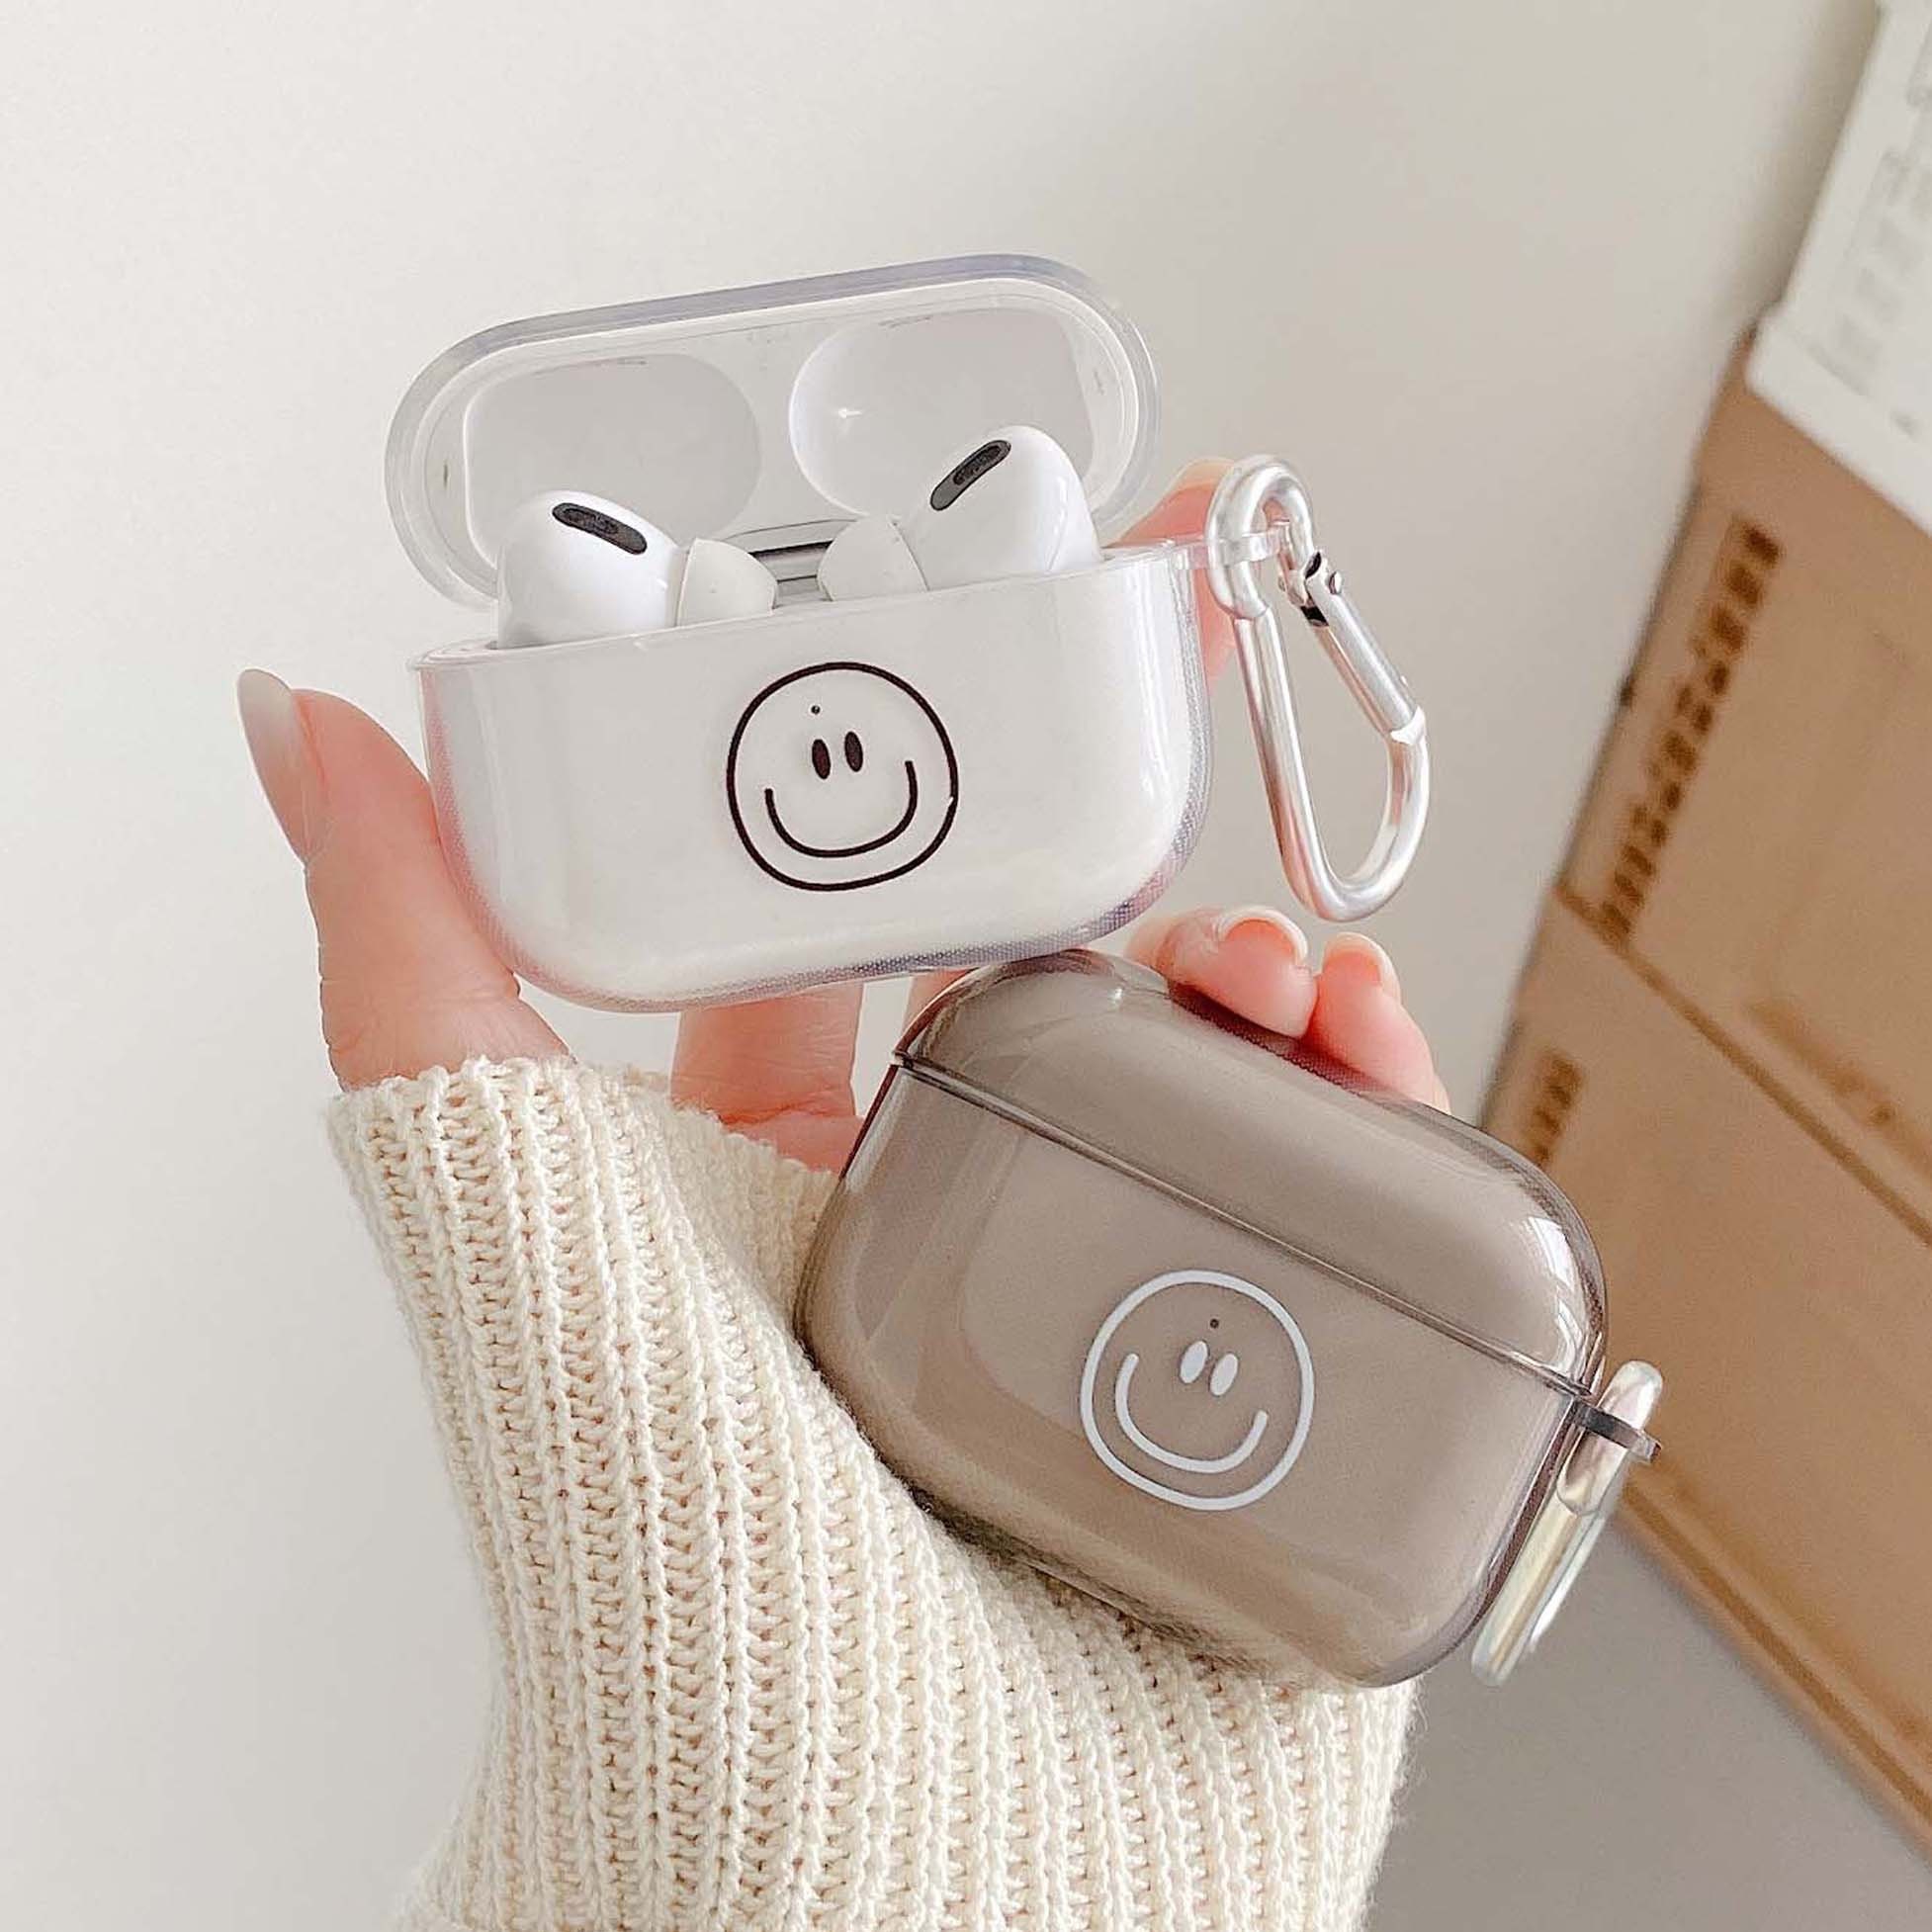 Panda Earpods Case S00 - Art of Living - Tech Objects and Accessories